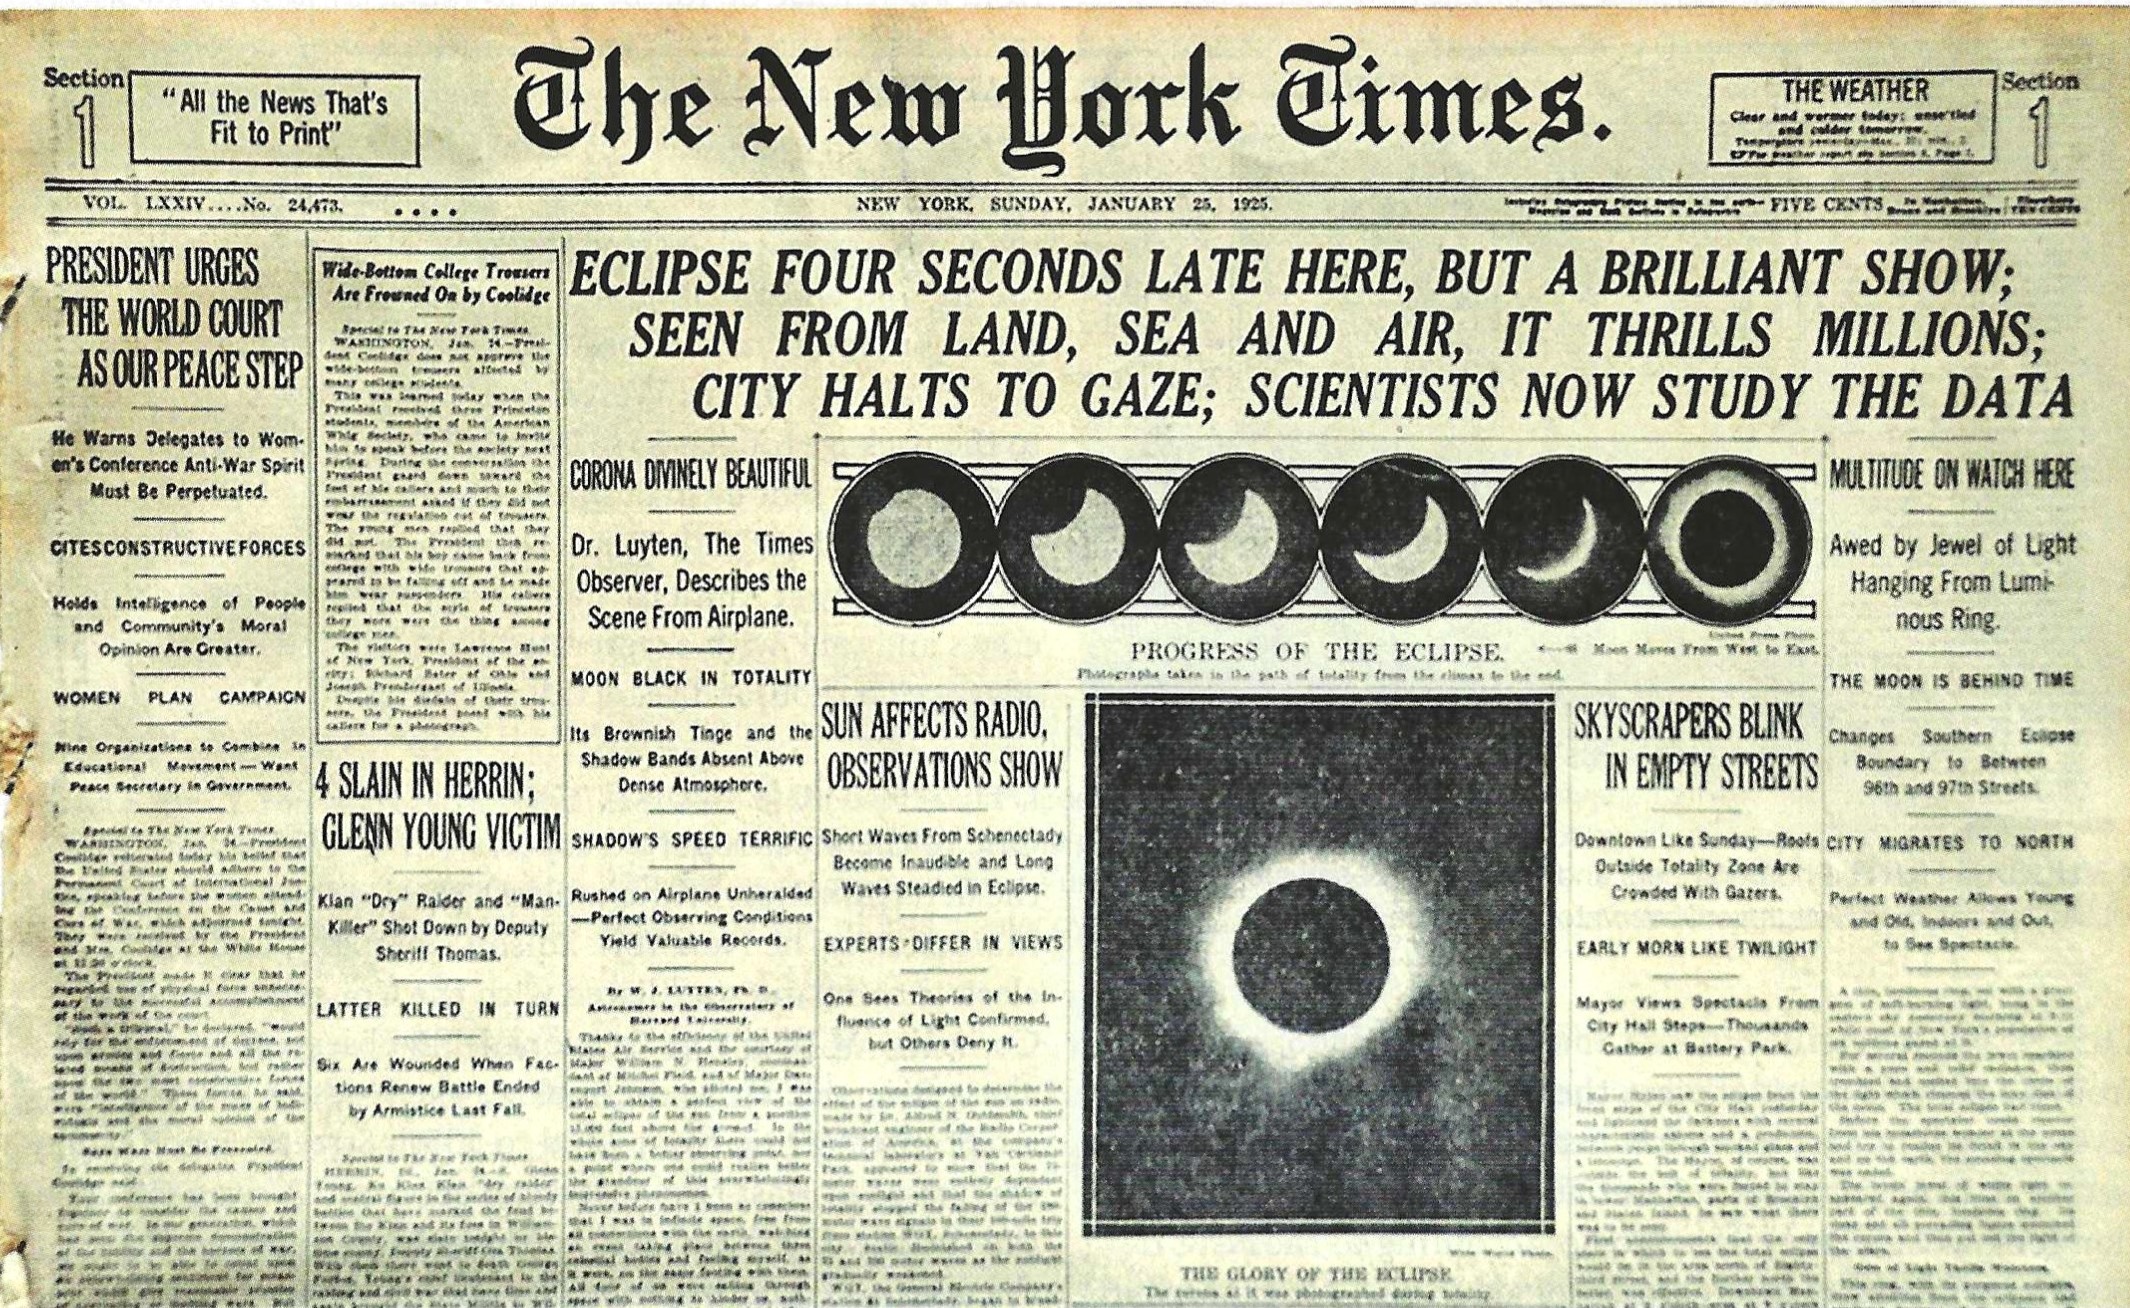 Front page of The New York Times in 1925, featuring eclipse stories.